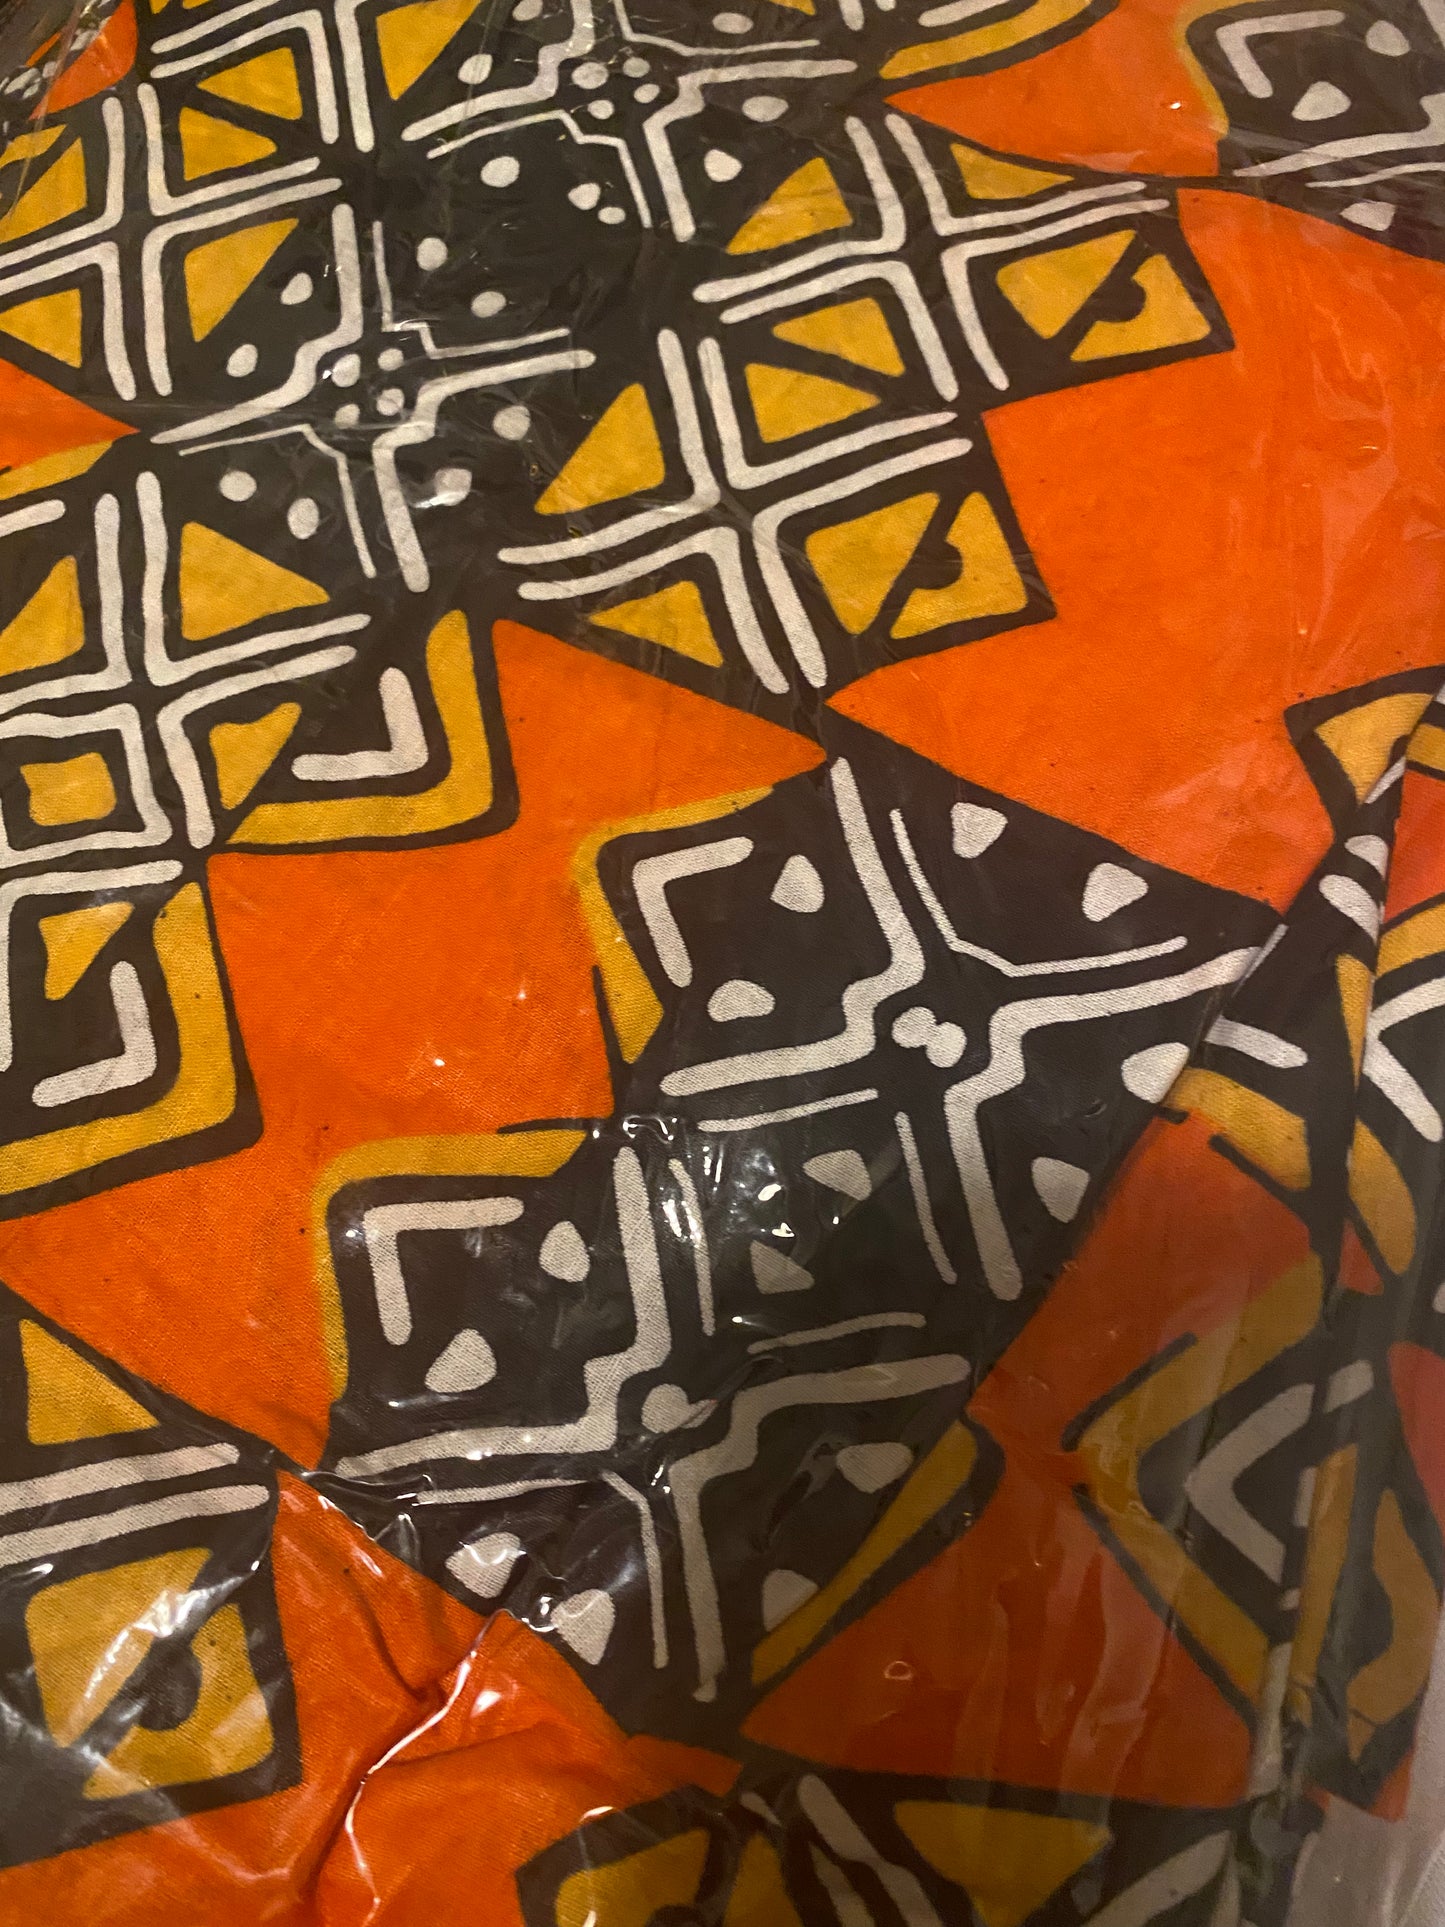 African Print Full Skirt with Coordinating Head Wrap and FaceMask (Orange Black Squared)